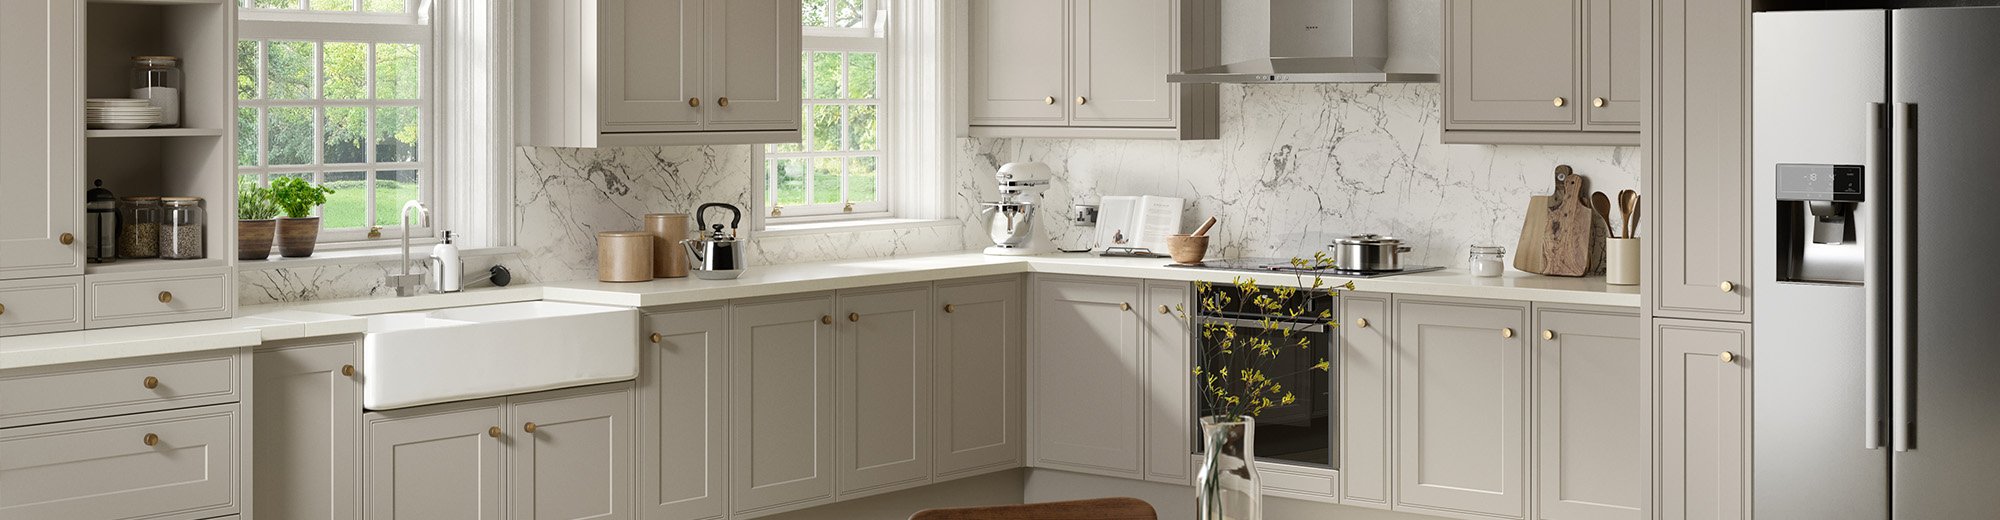 Why Choose Replacement Kitchen Doors